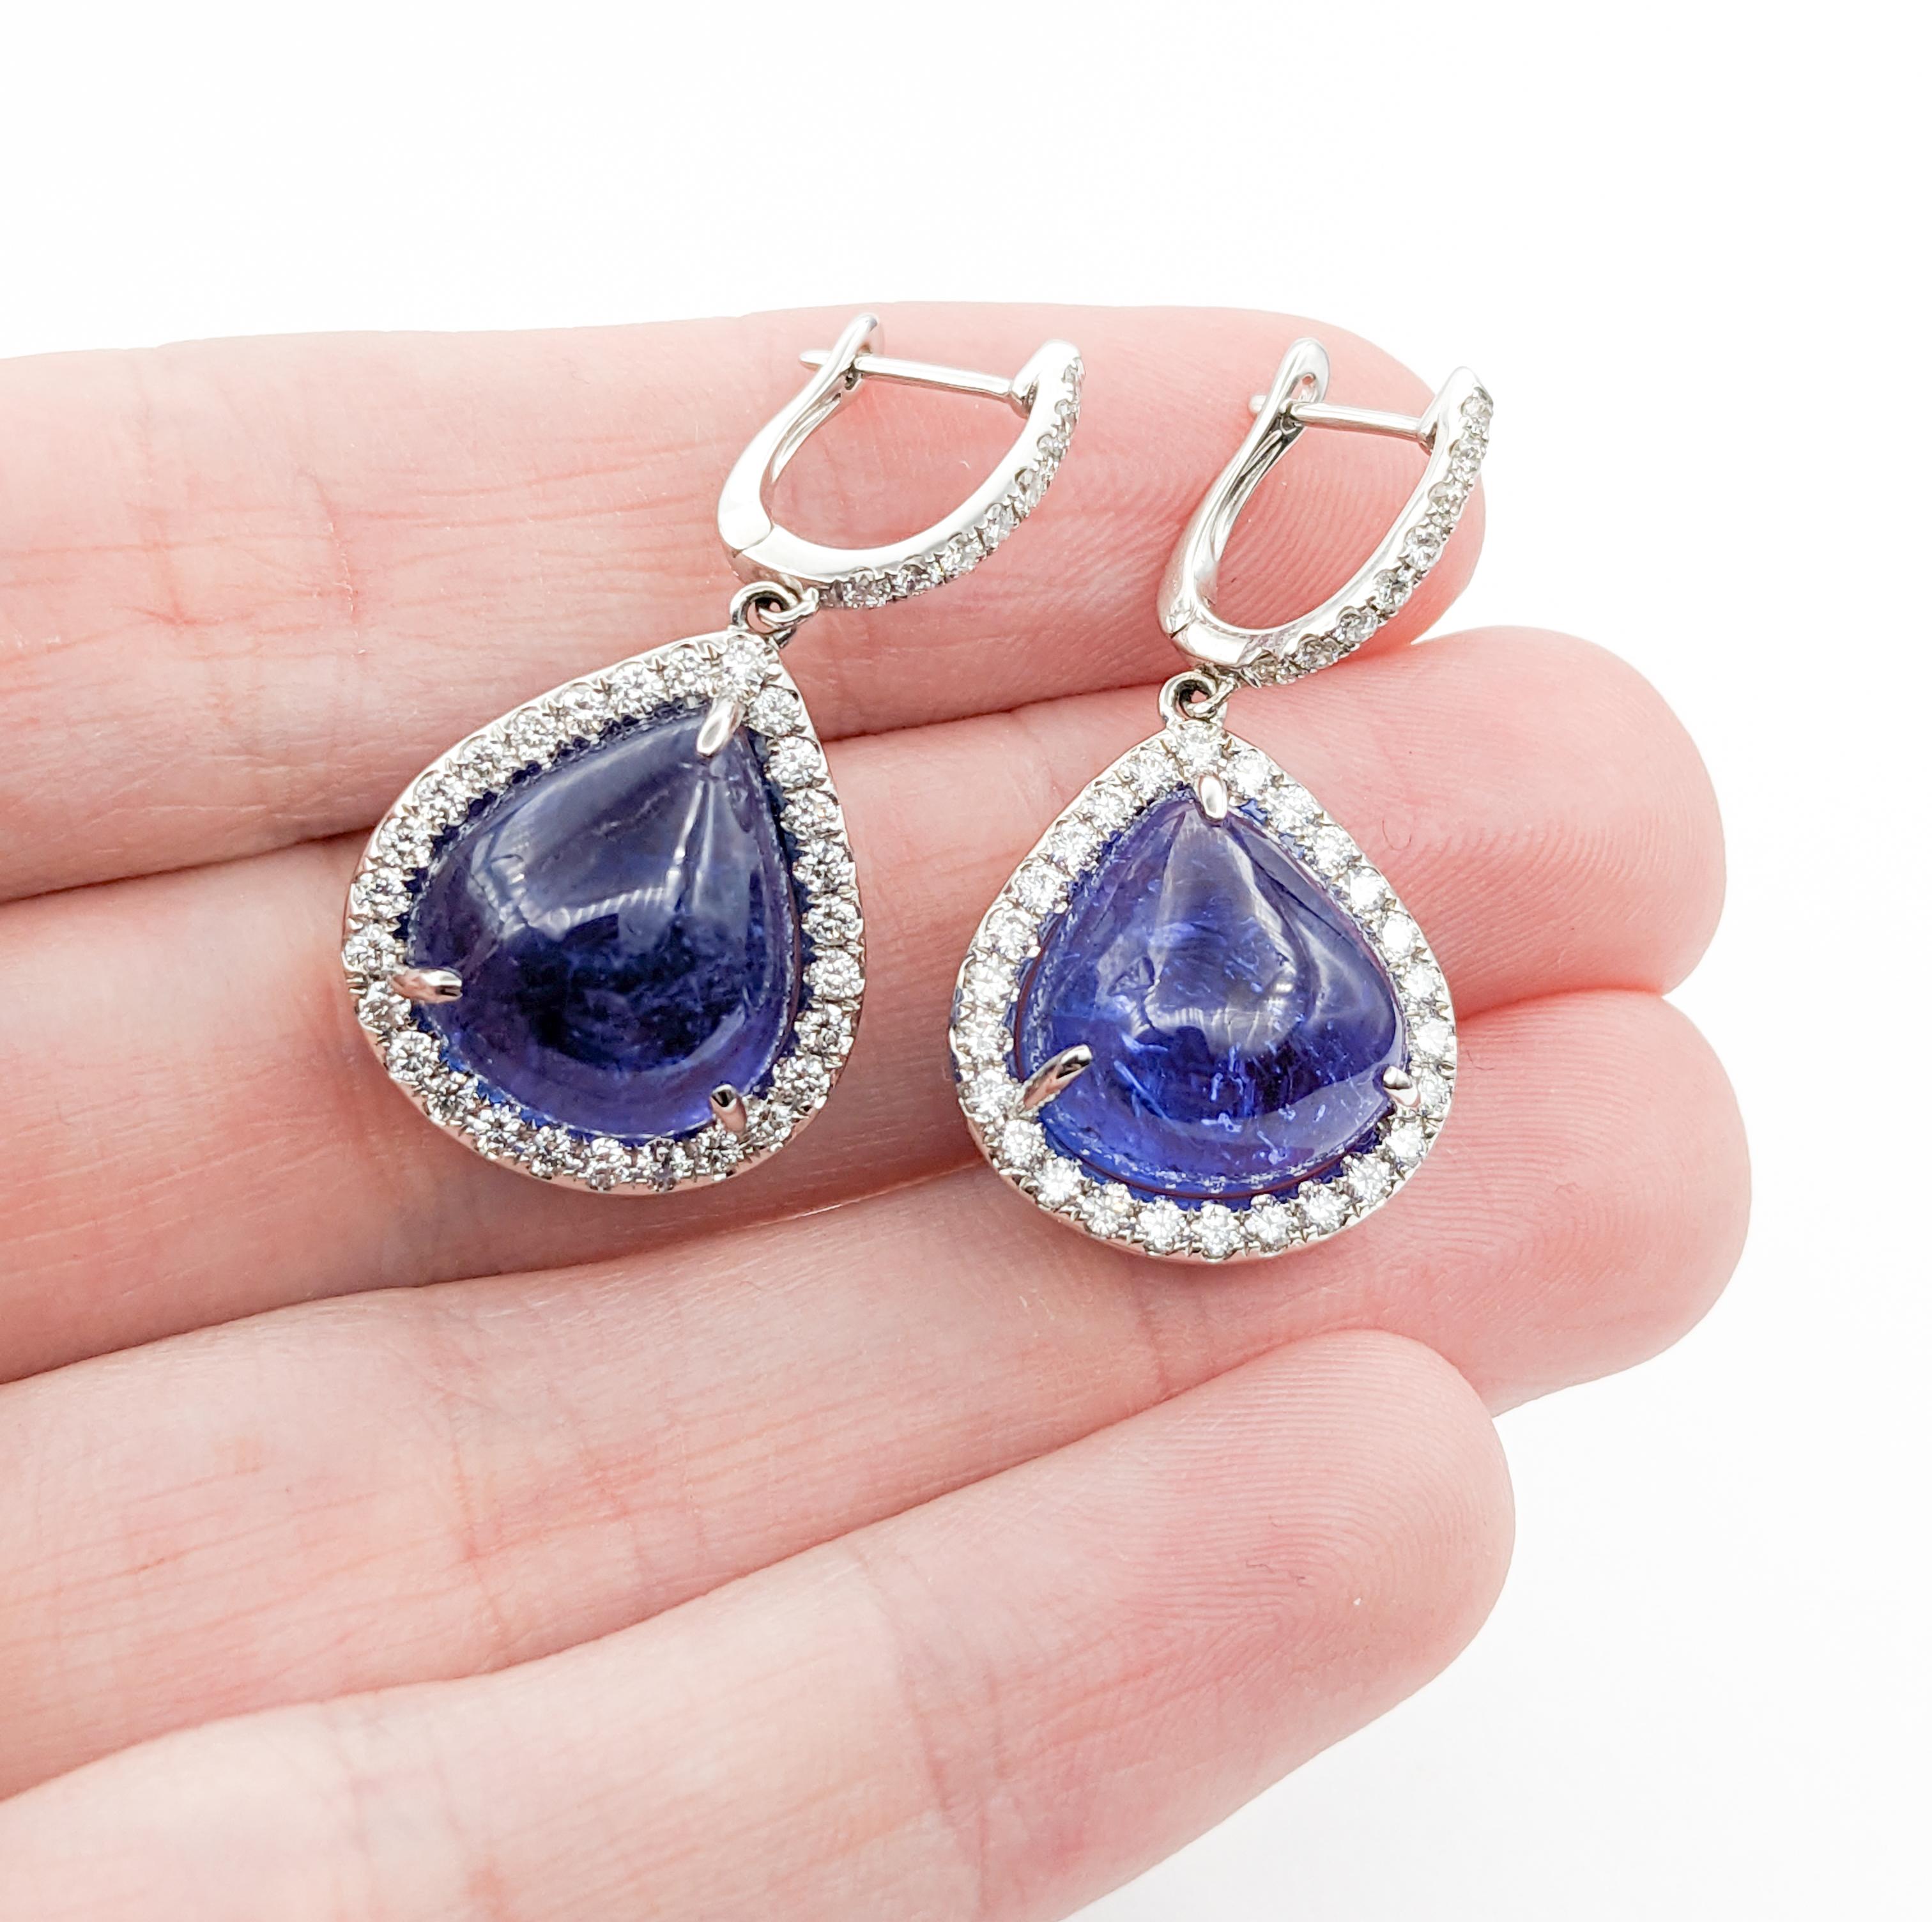 Statement 20.07ctw Cabochon Tanzanite & Diamond Drop Earrings

Introducing these exquisite earrings, meticulously crafted in 14k white gold, adorned with 1.13ctw of sparkling round diamonds. The diamonds, with their impressive SI1 clarity and G